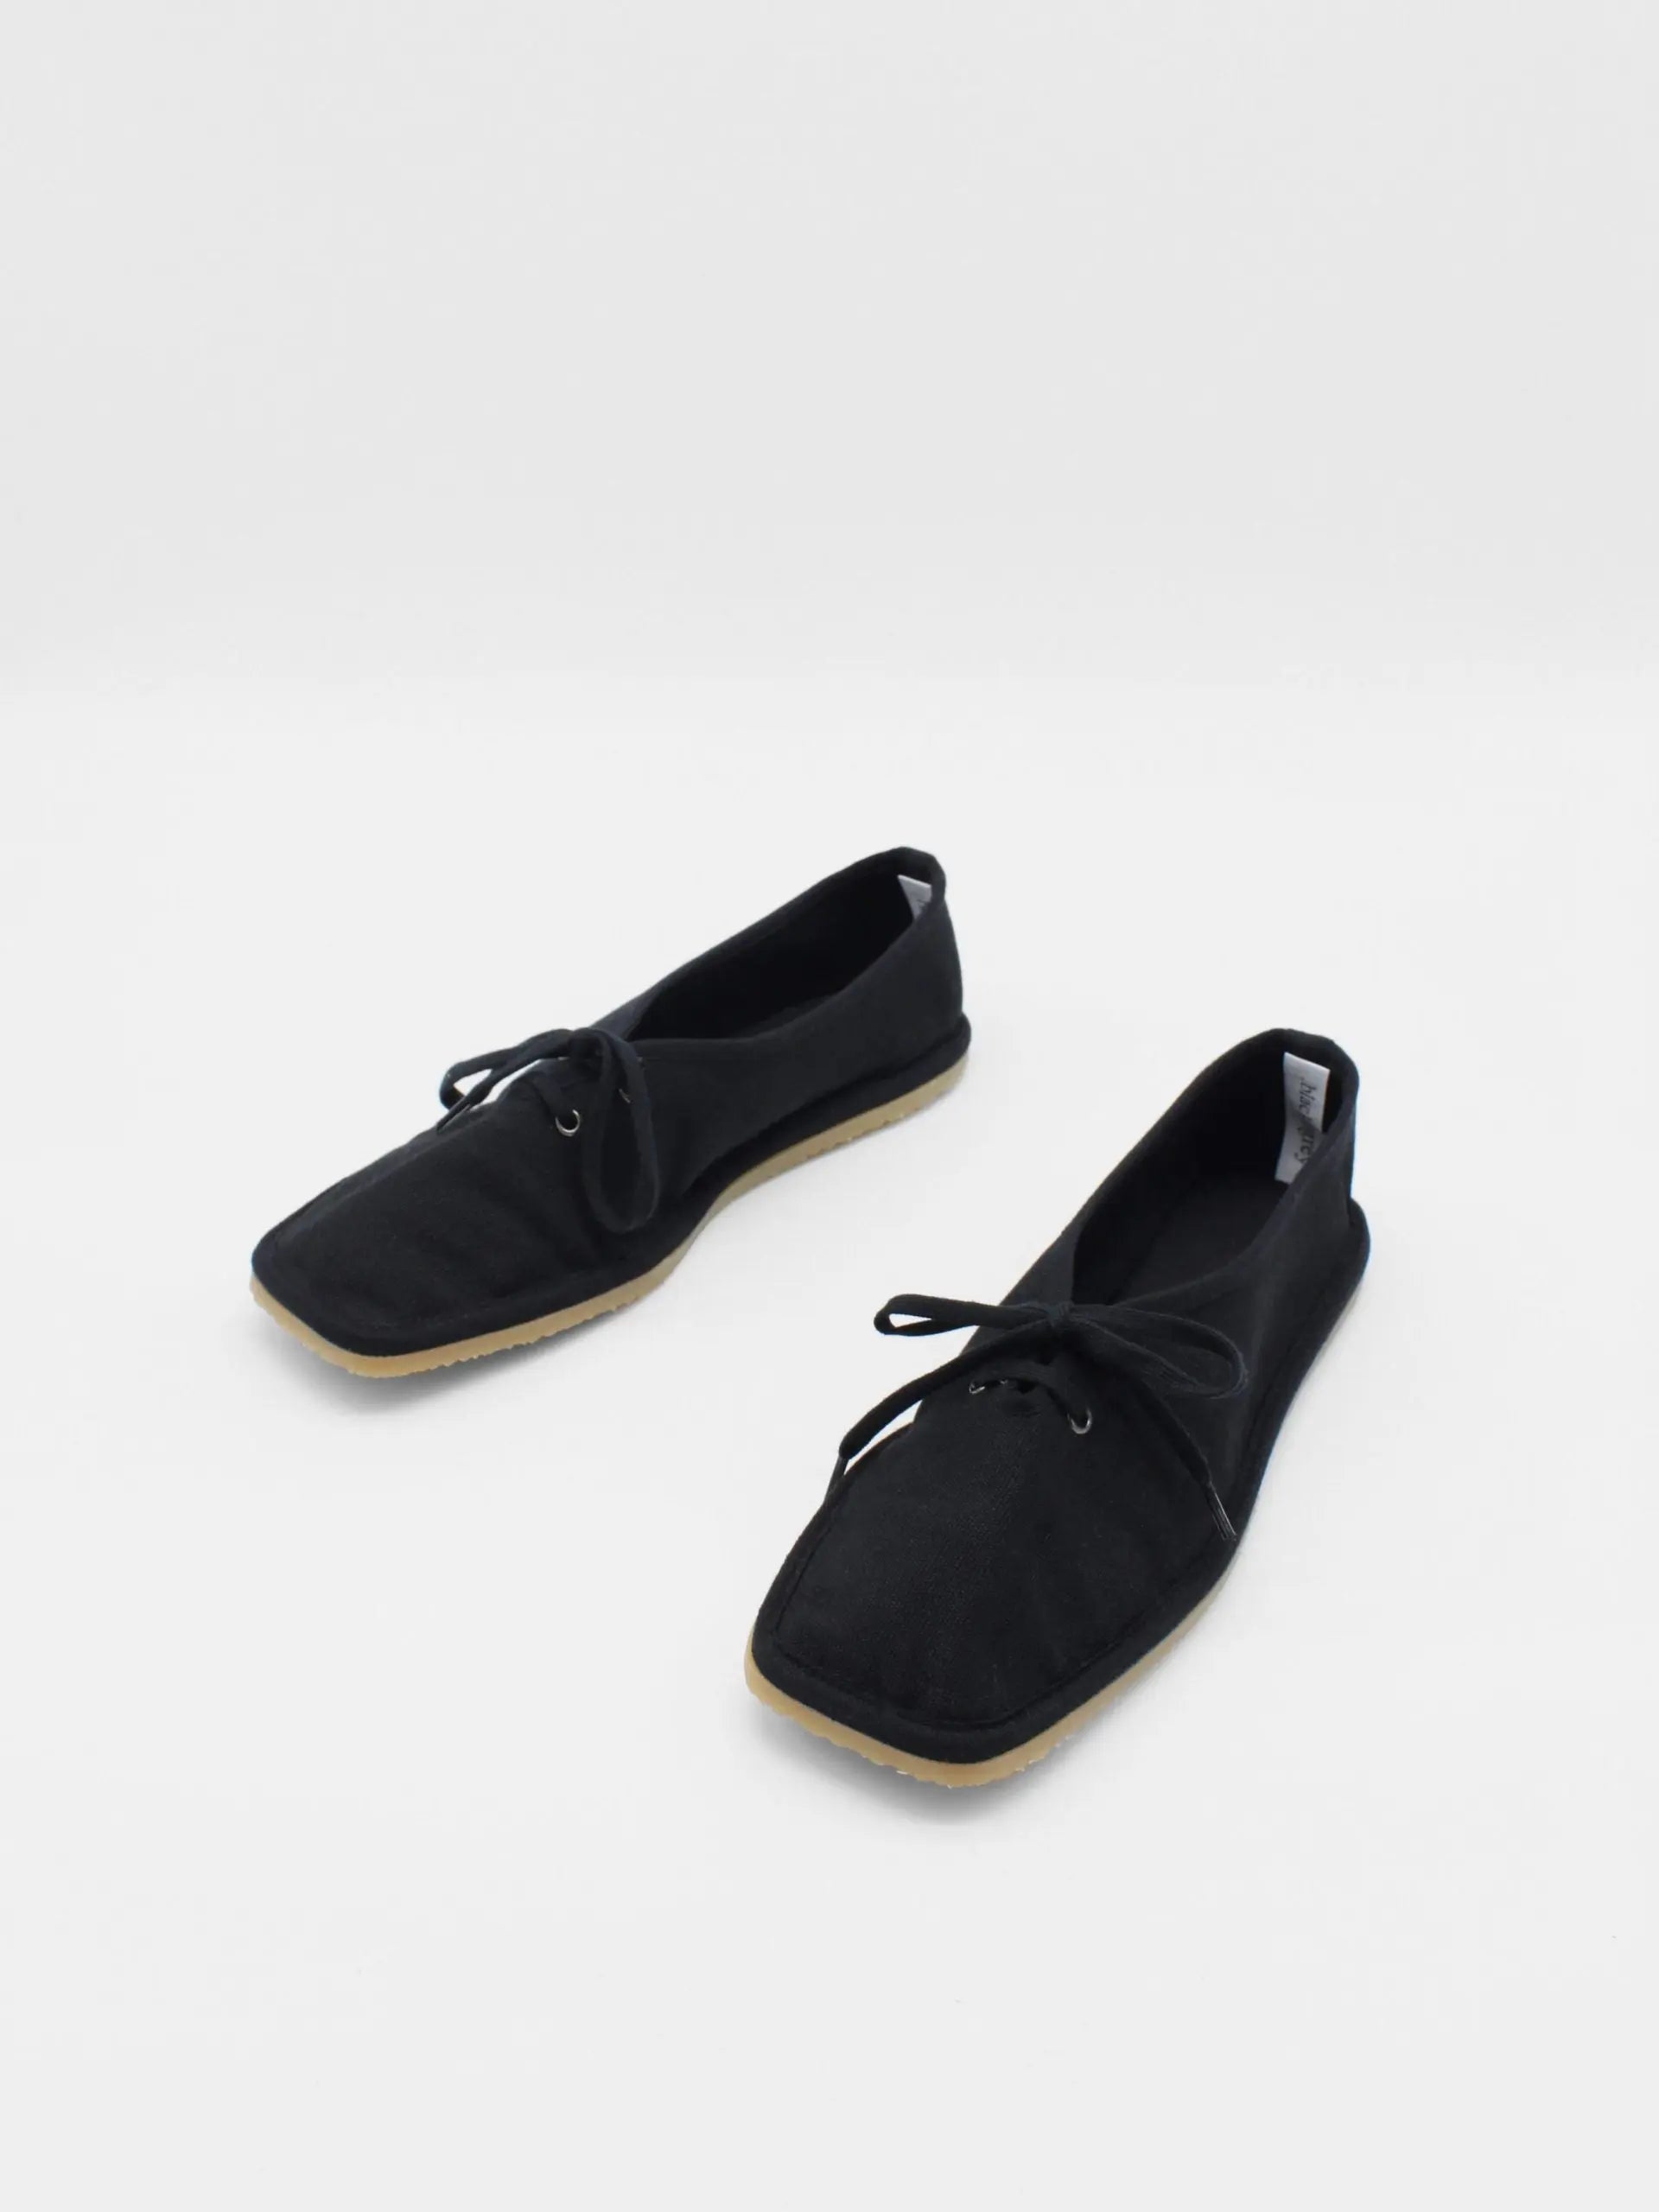 A pair of Lona Black shoes by About Arianne with a minimalist, square-toe design, positioned side by side on a white background. The shoes have black laces and appear to be made of a fabric material, reflecting the chic style found in Barcelona's finest stores.